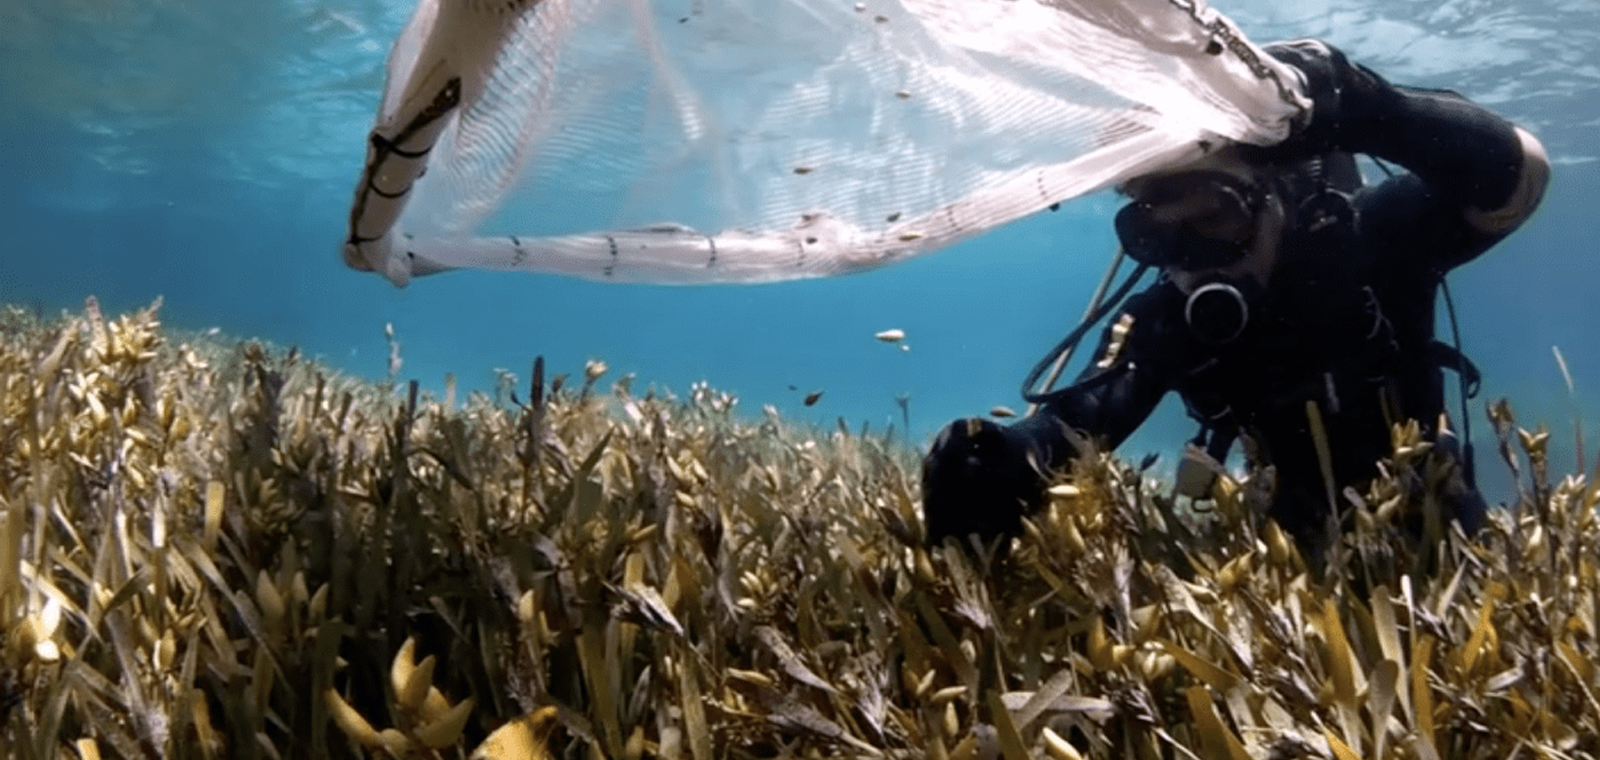 MMA Offshore and OzFish announce collaboration for seagrass restoration